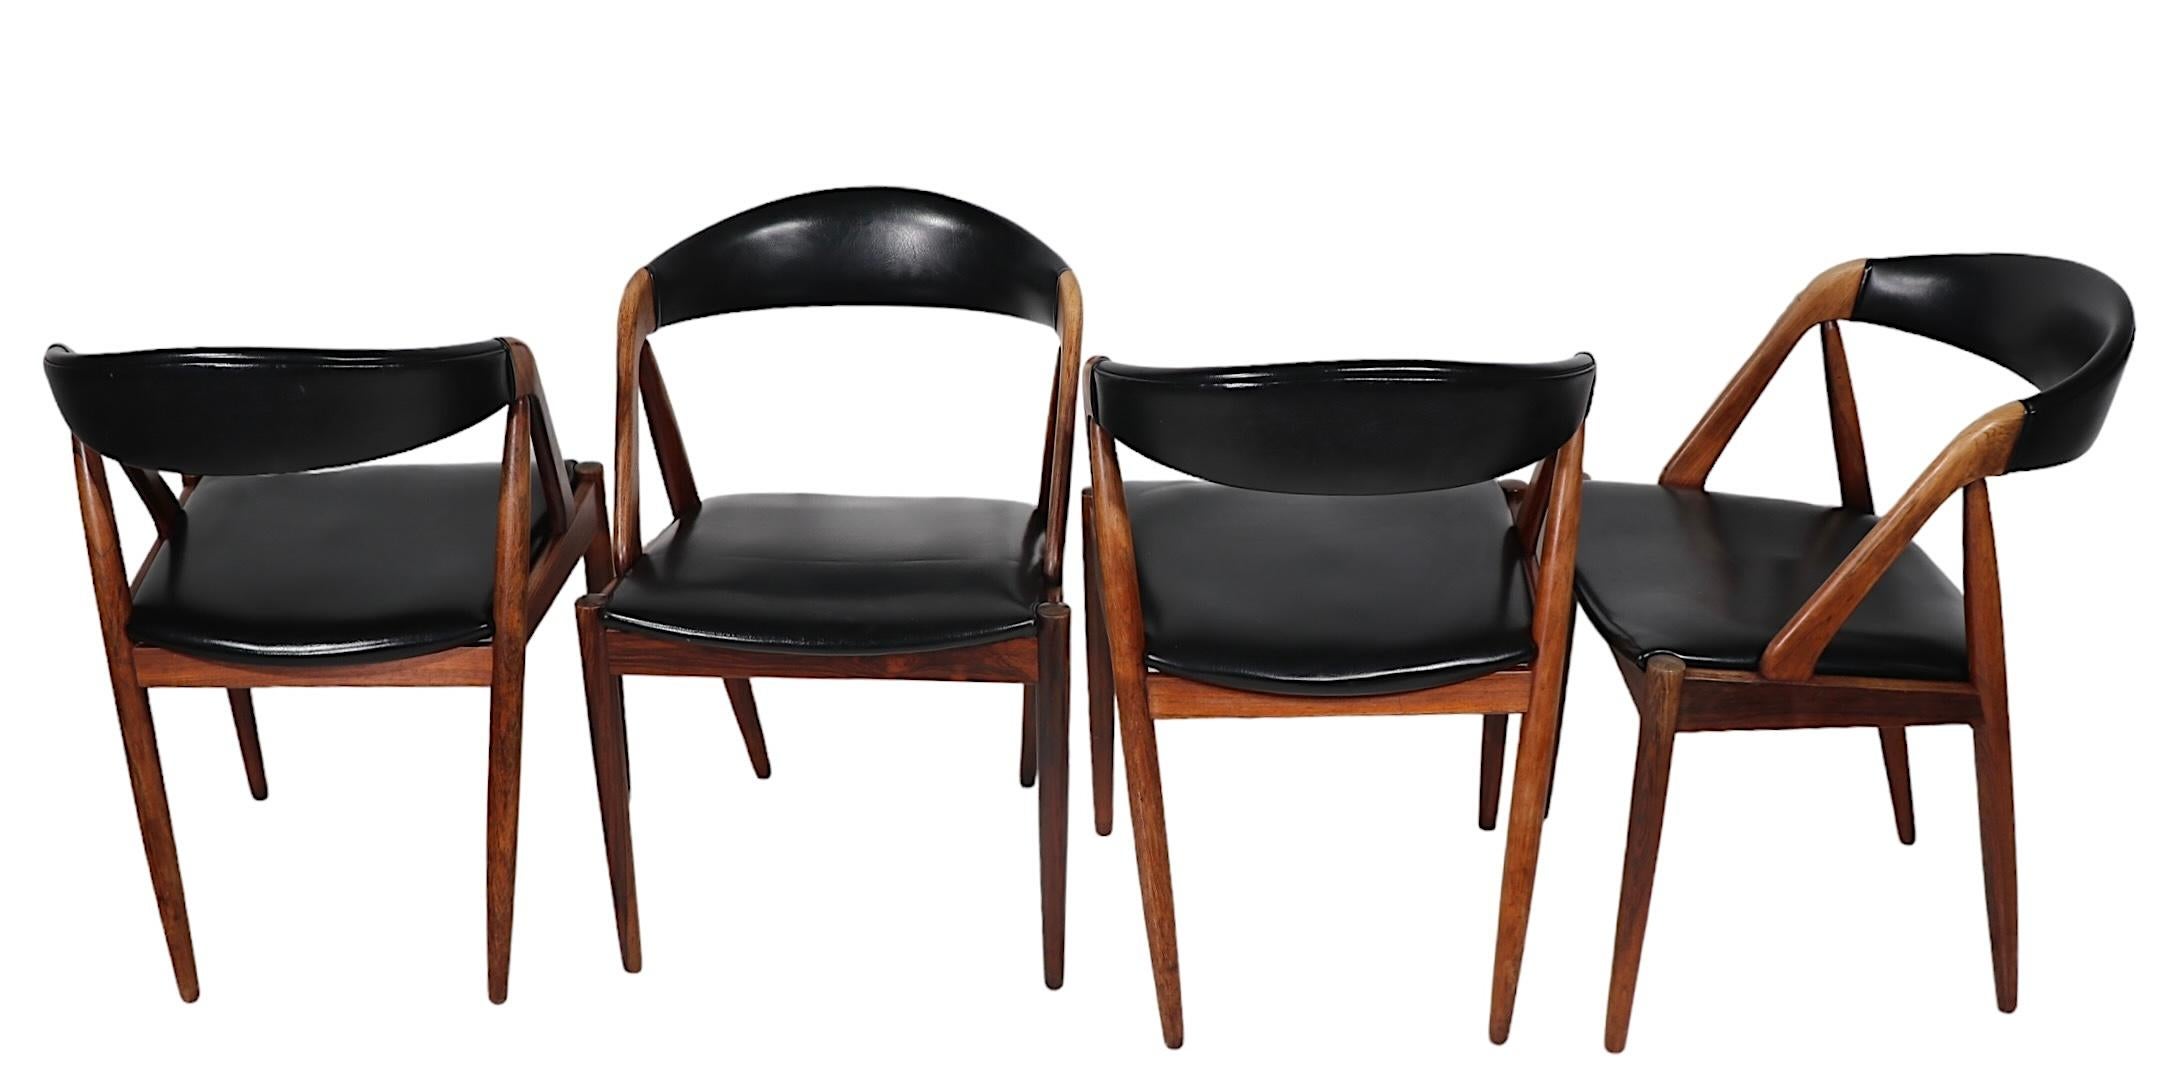 20th Century  4 Rosewood Model 31 Danish Mid Century Modern Dining Chairs by Kai Kristiansen  For Sale